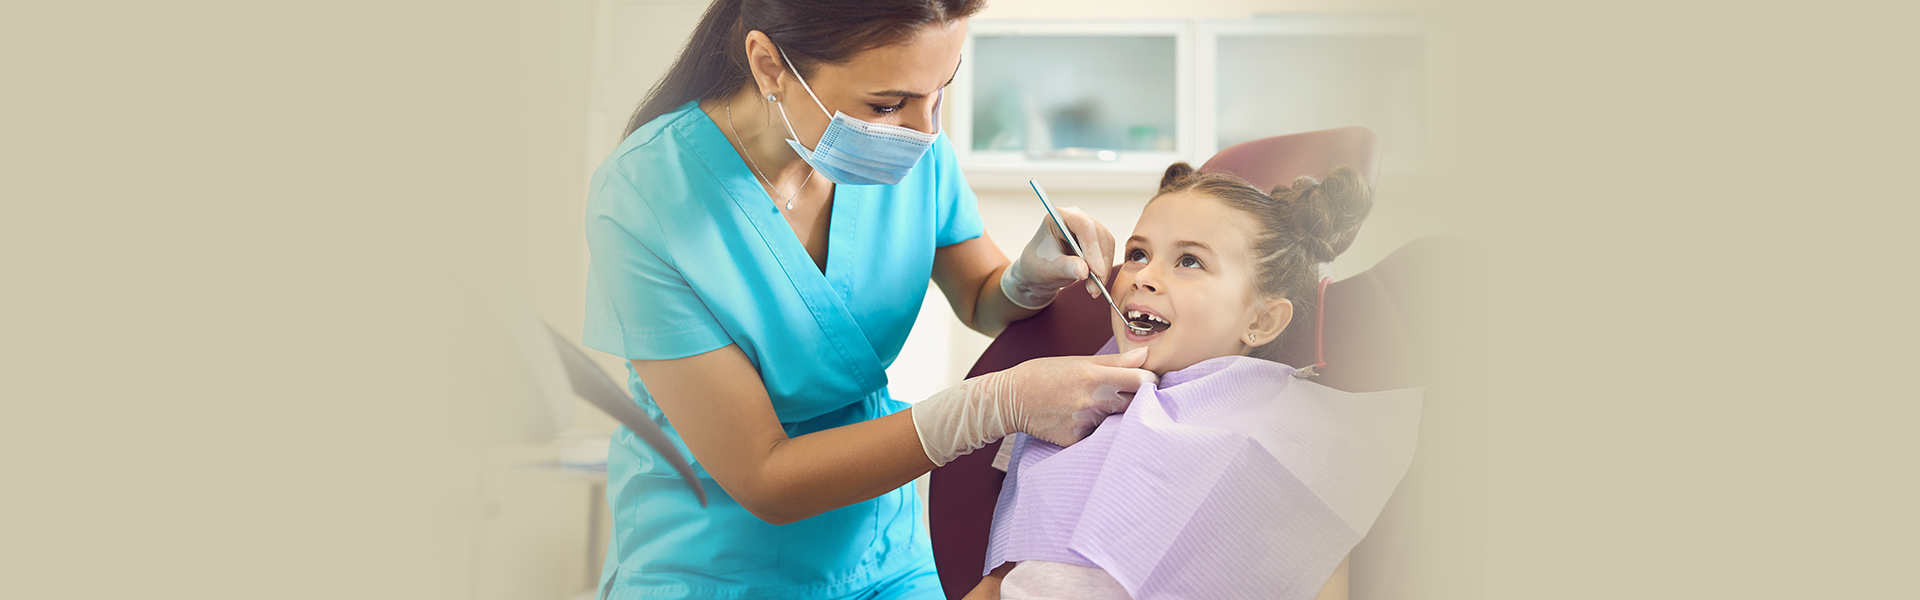 This image depicts pediatric dentistry at Waterdown Smiles Dentistry.